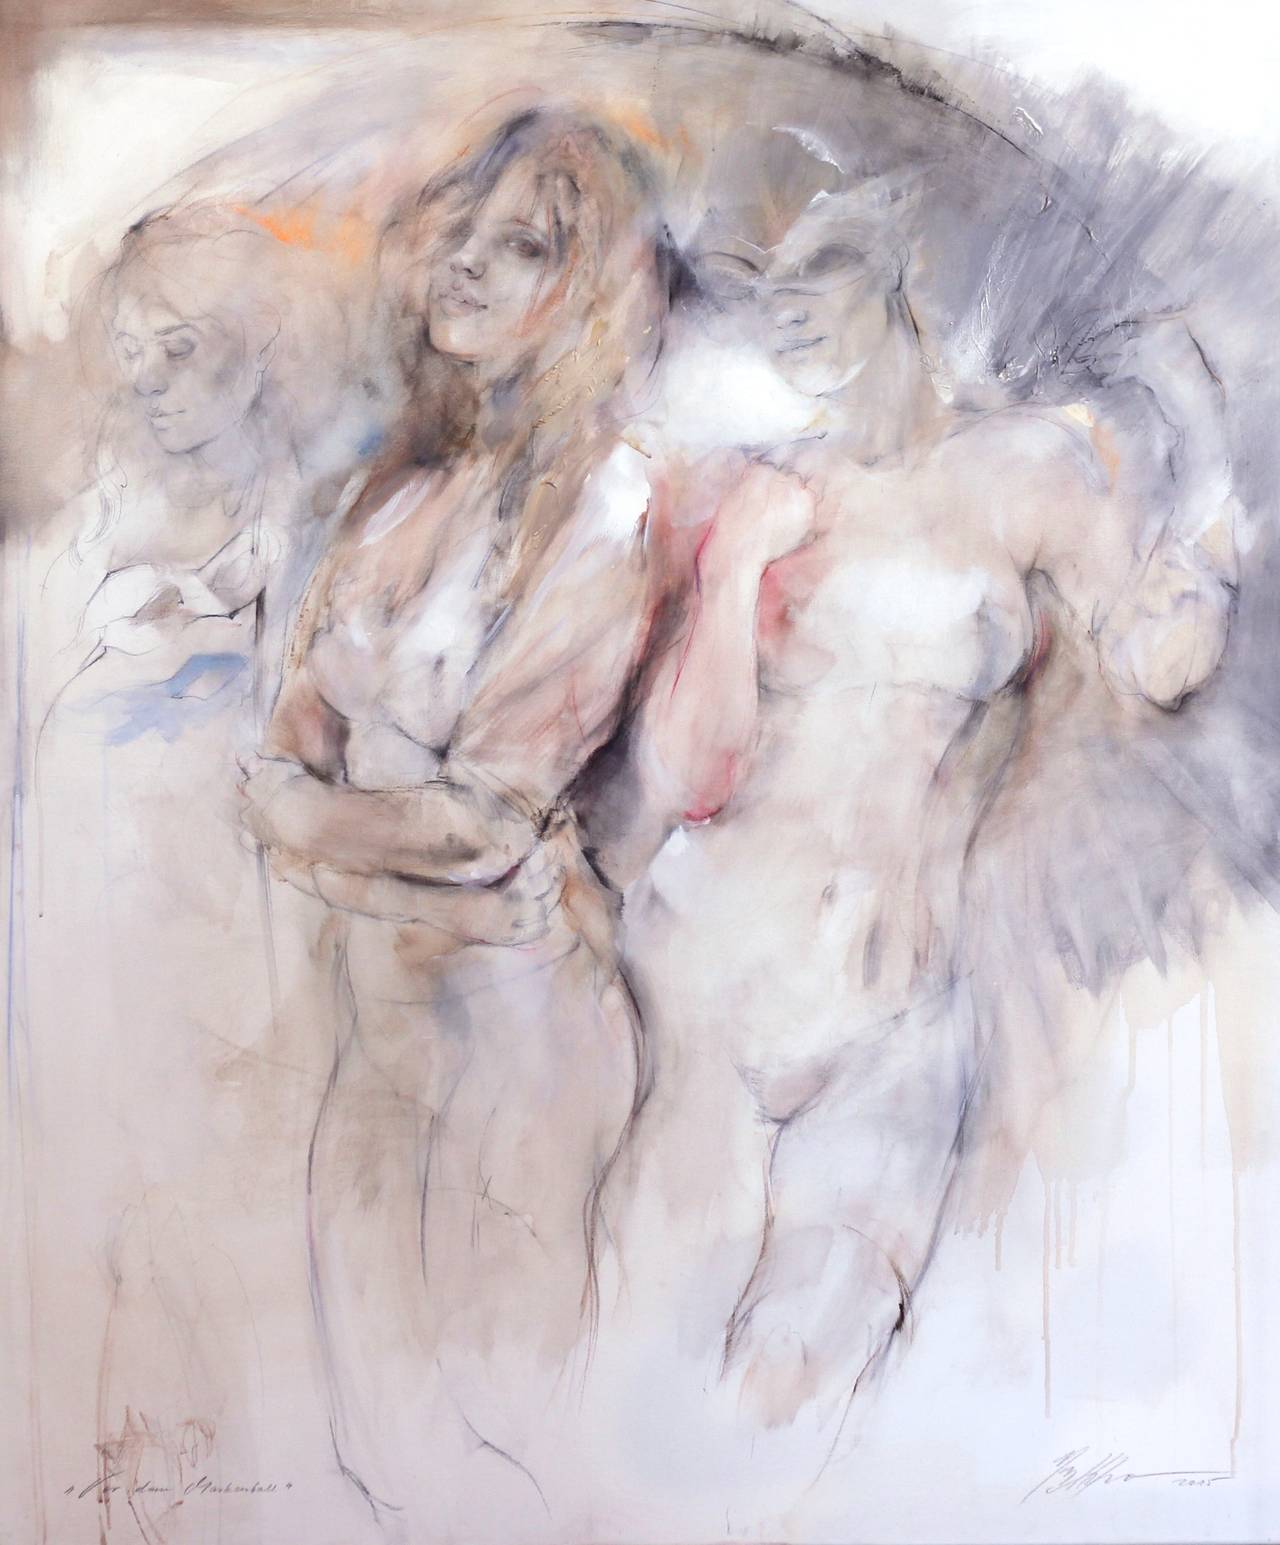 Grace - Soft Toned Sensitive Portrayal of Intimate Figures and Graceful Nudes